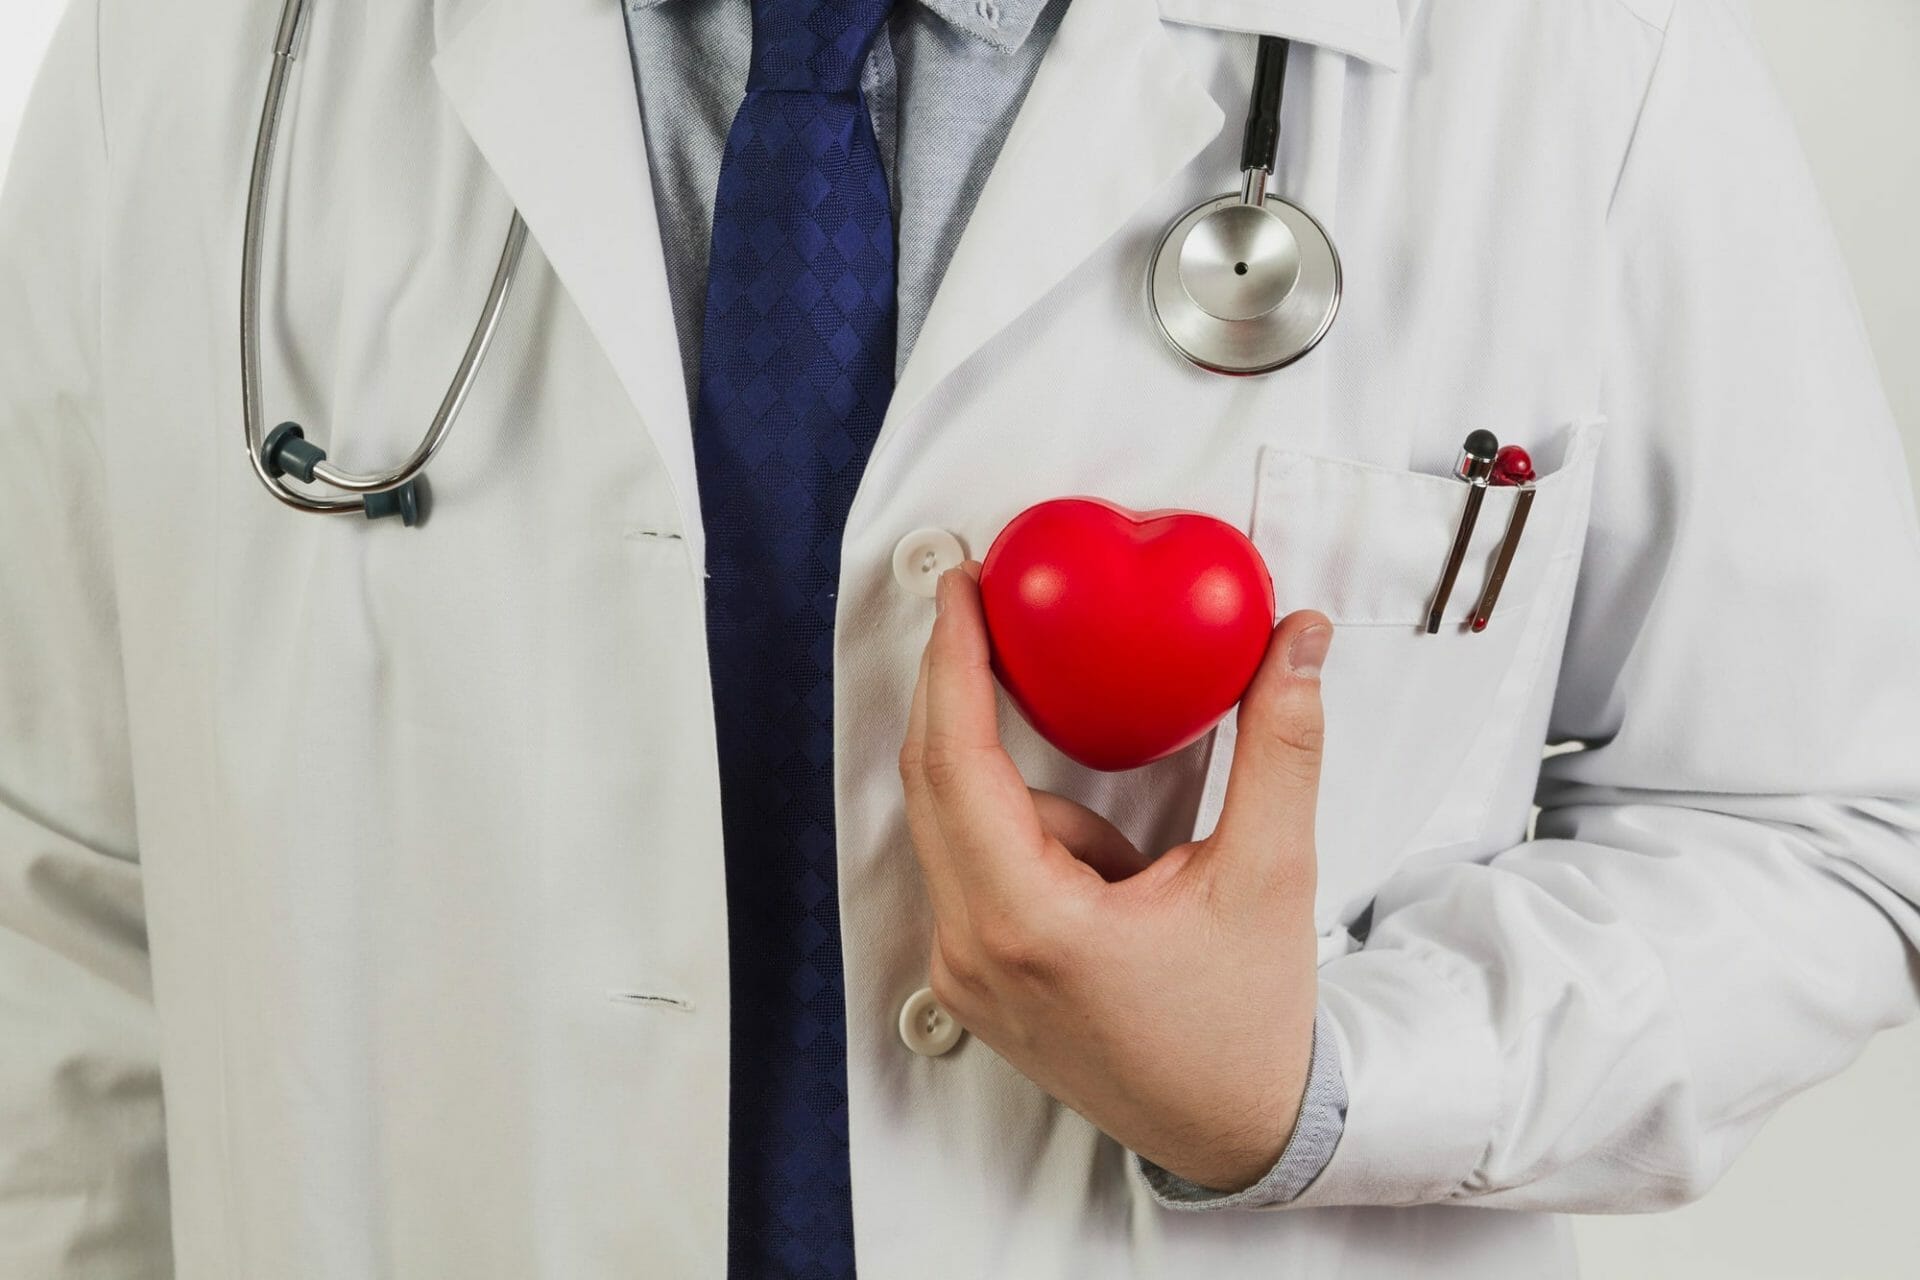 Heart Disease : Types, Causes, and Management